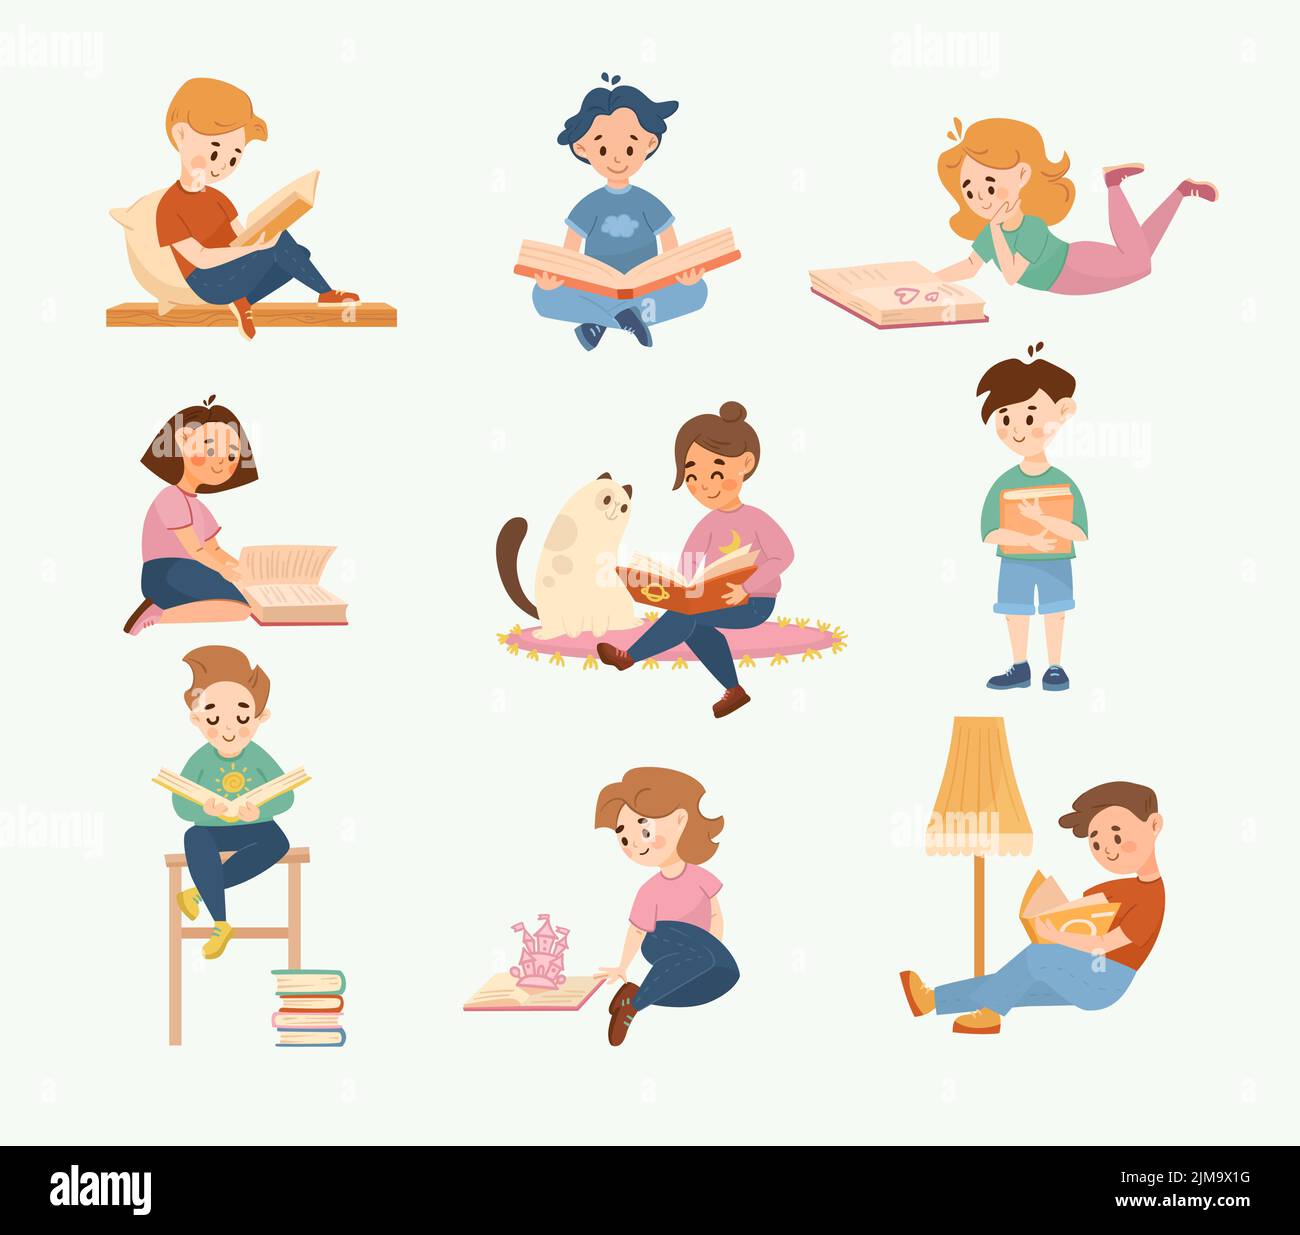 Happy children reading book cartoon illustration set. Smart girls and boys lying, sitting, studying at home with funny cat. Education, leisure, hobby, Stock Vector